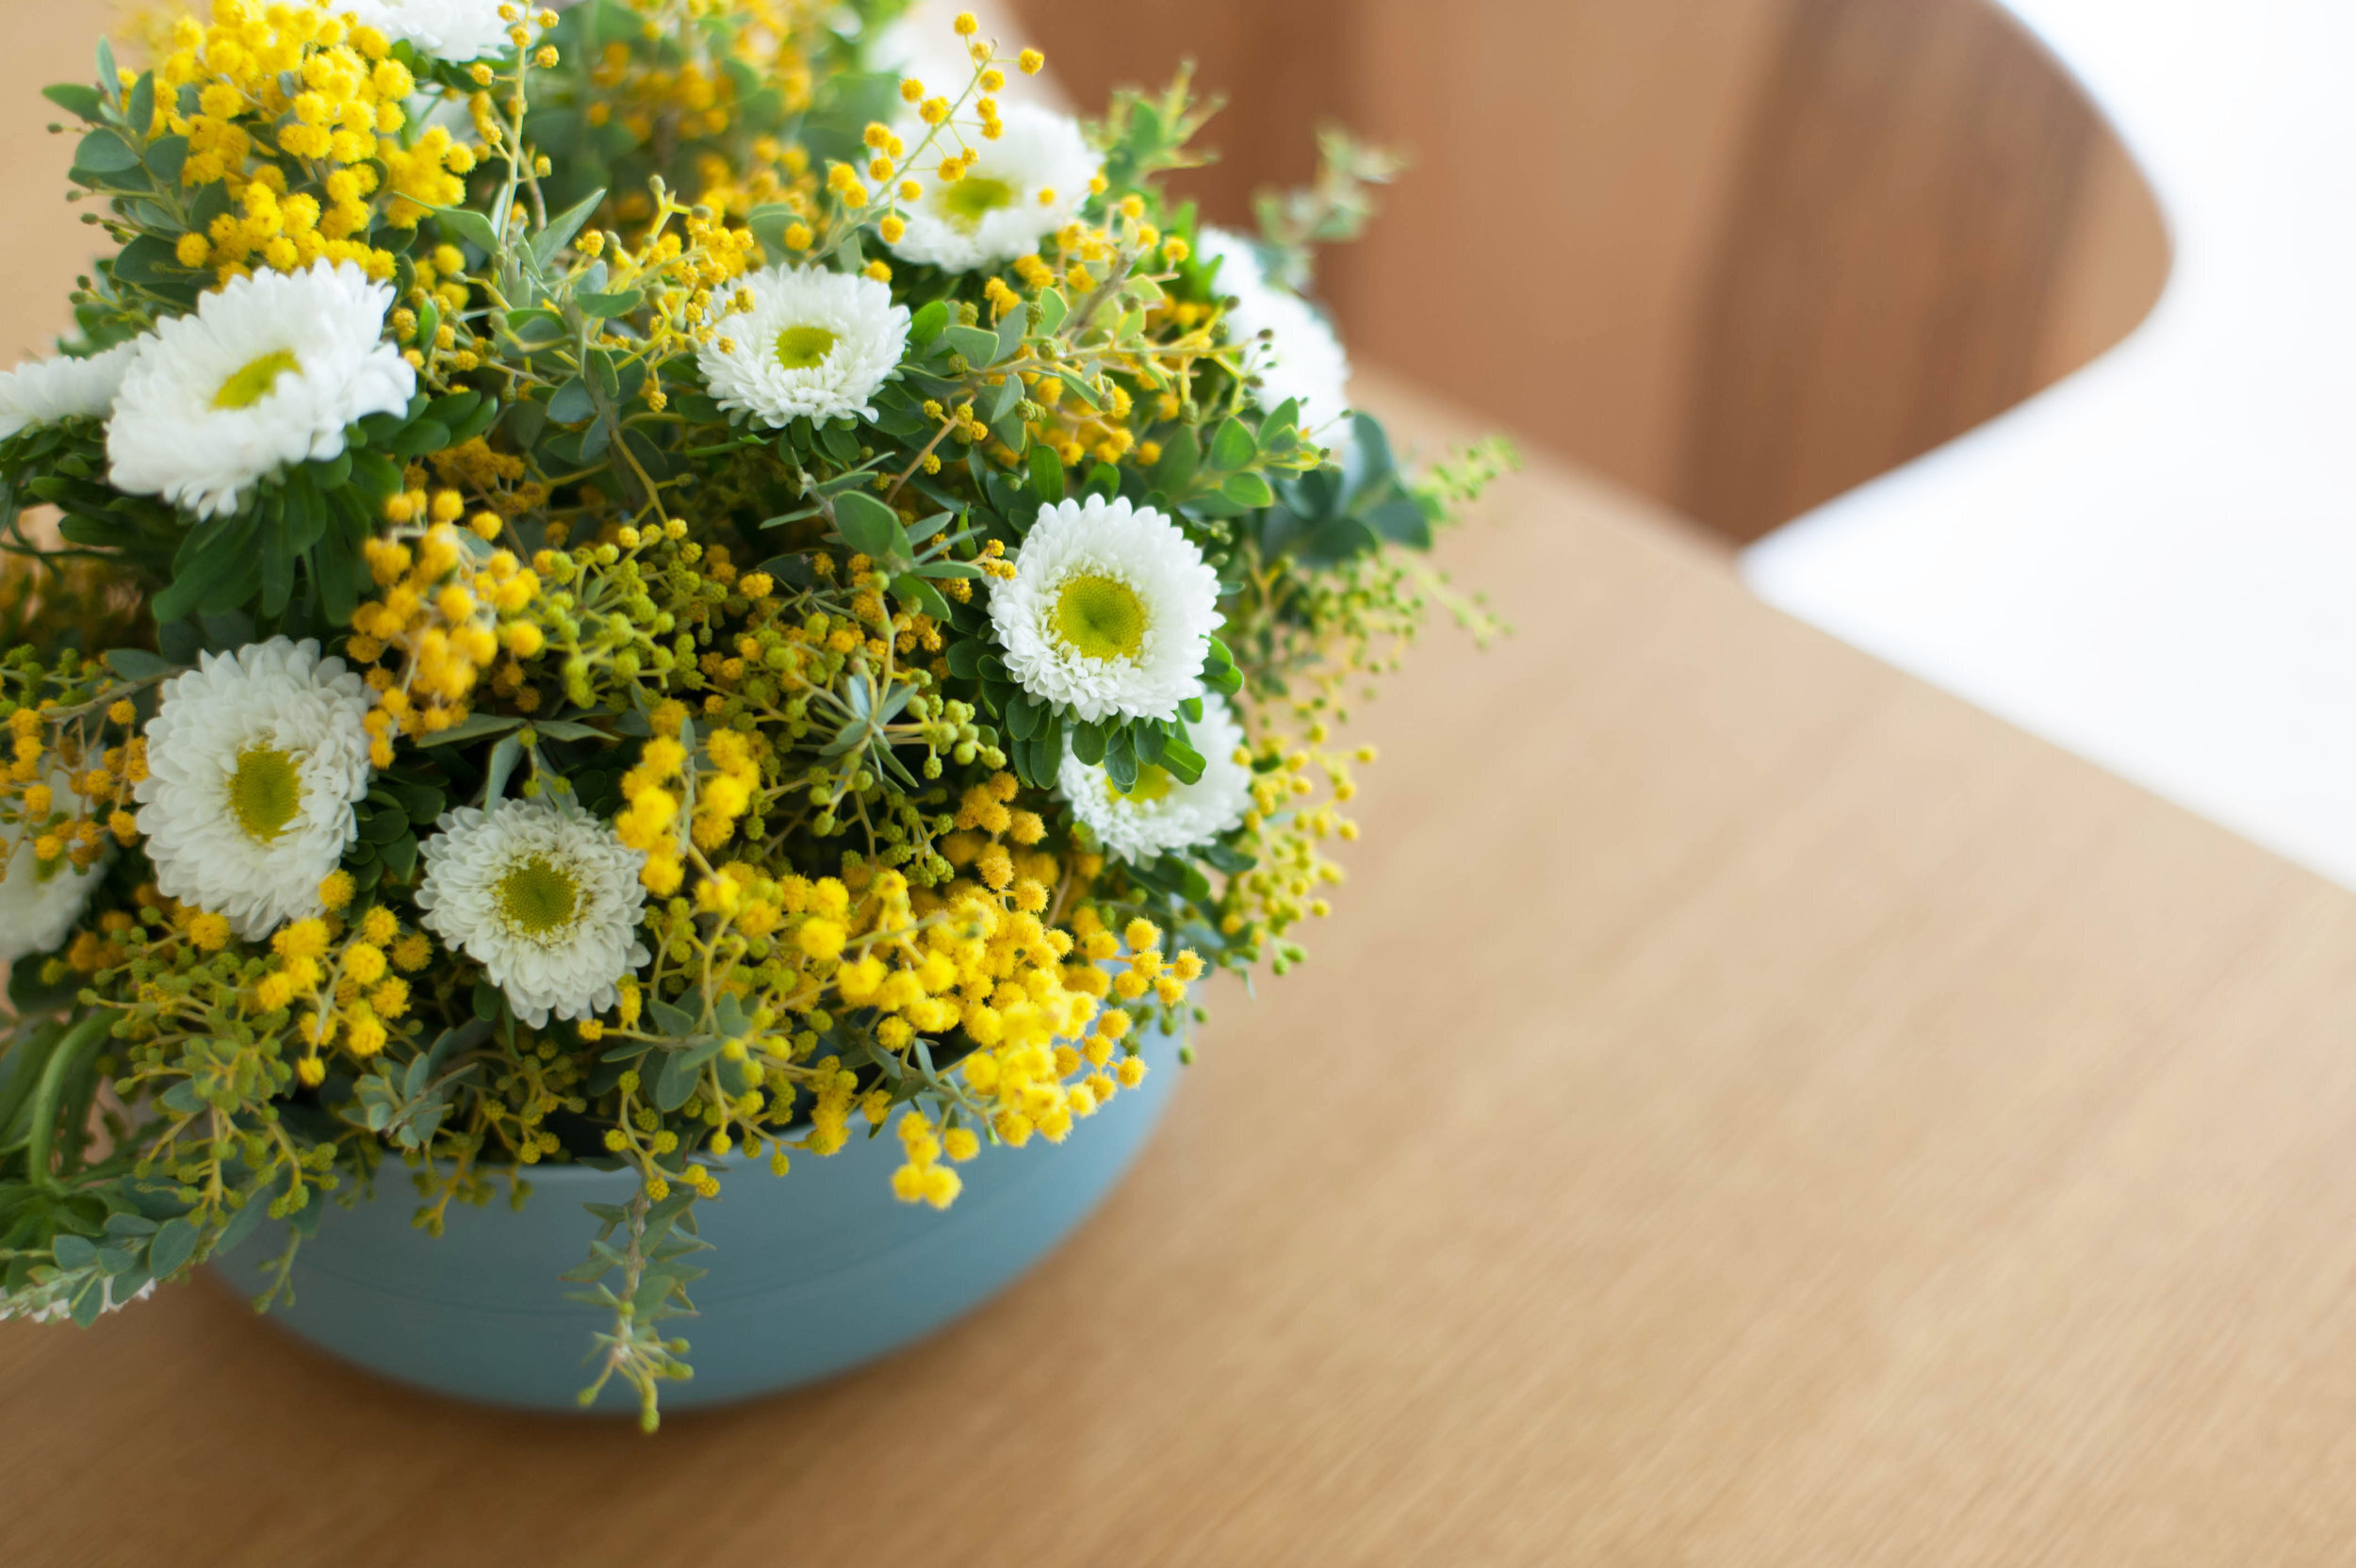 Yellow white and green floral arrangement in blue planter on wooden table